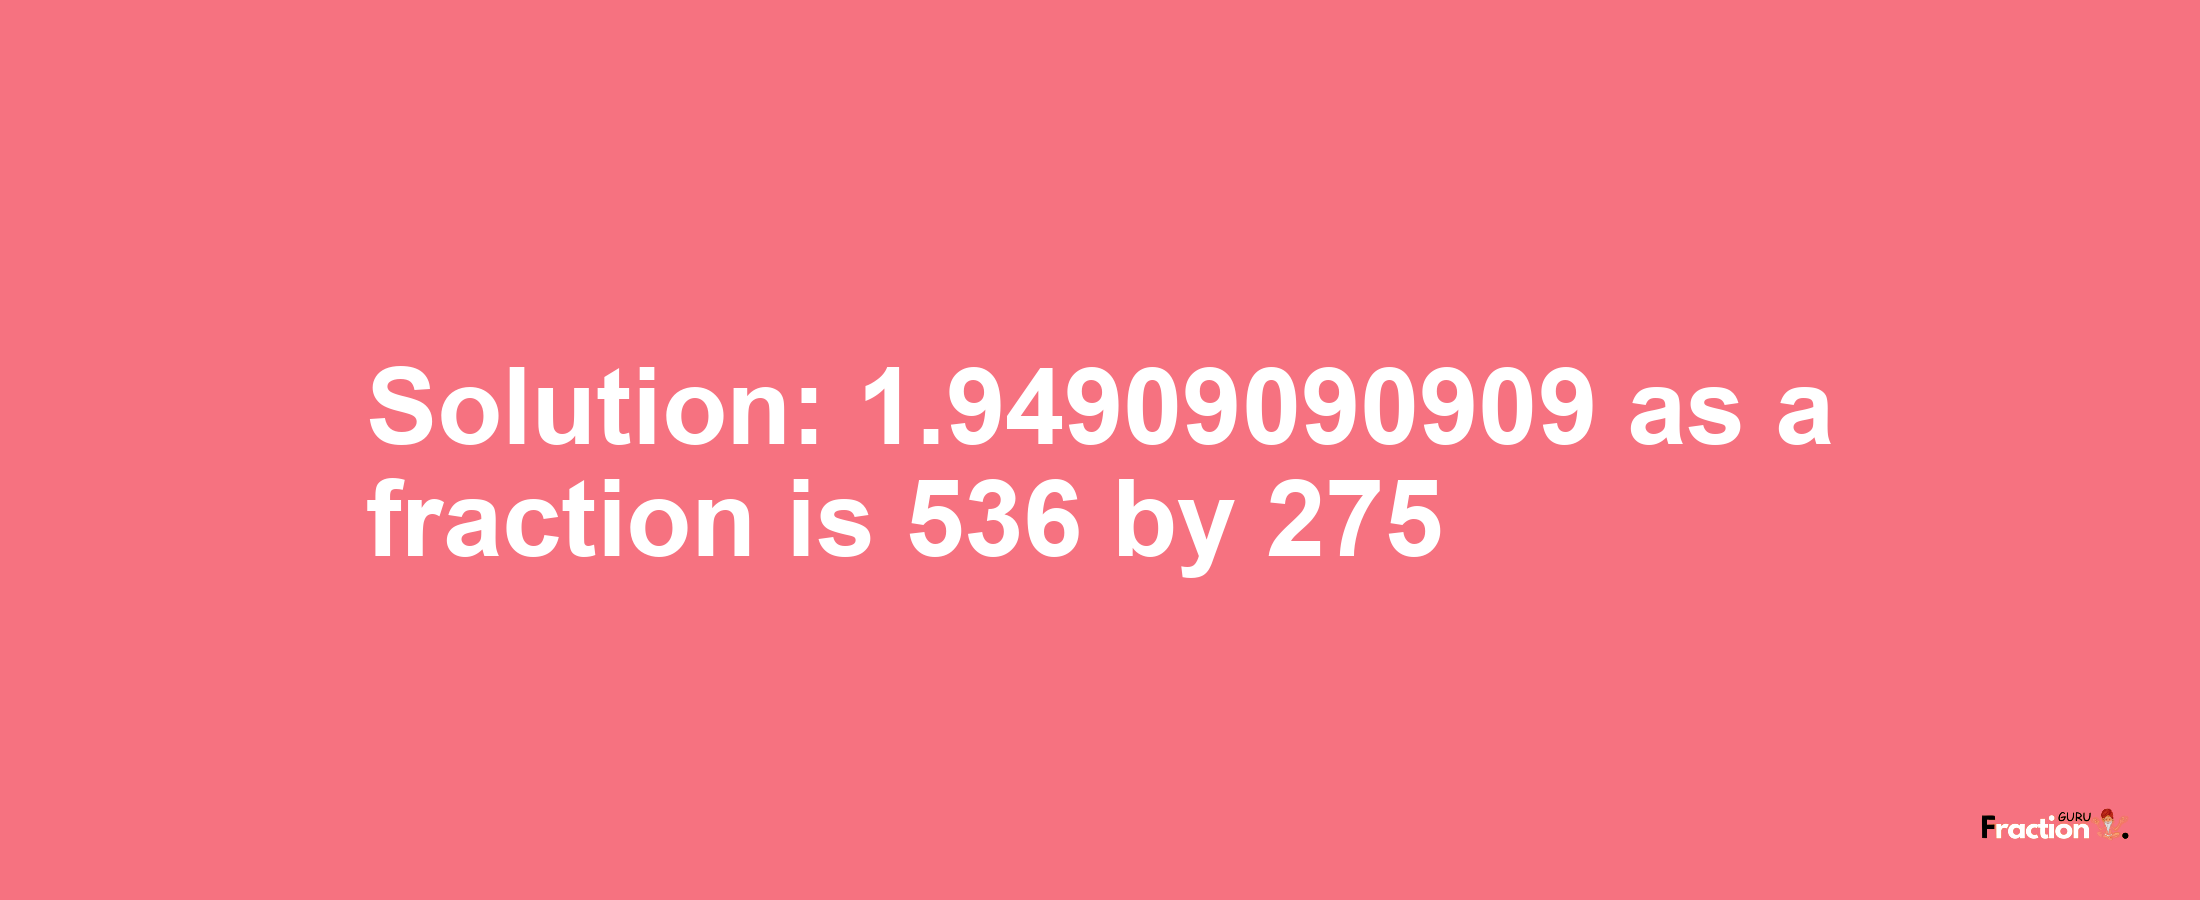 Solution:1.94909090909 as a fraction is 536/275